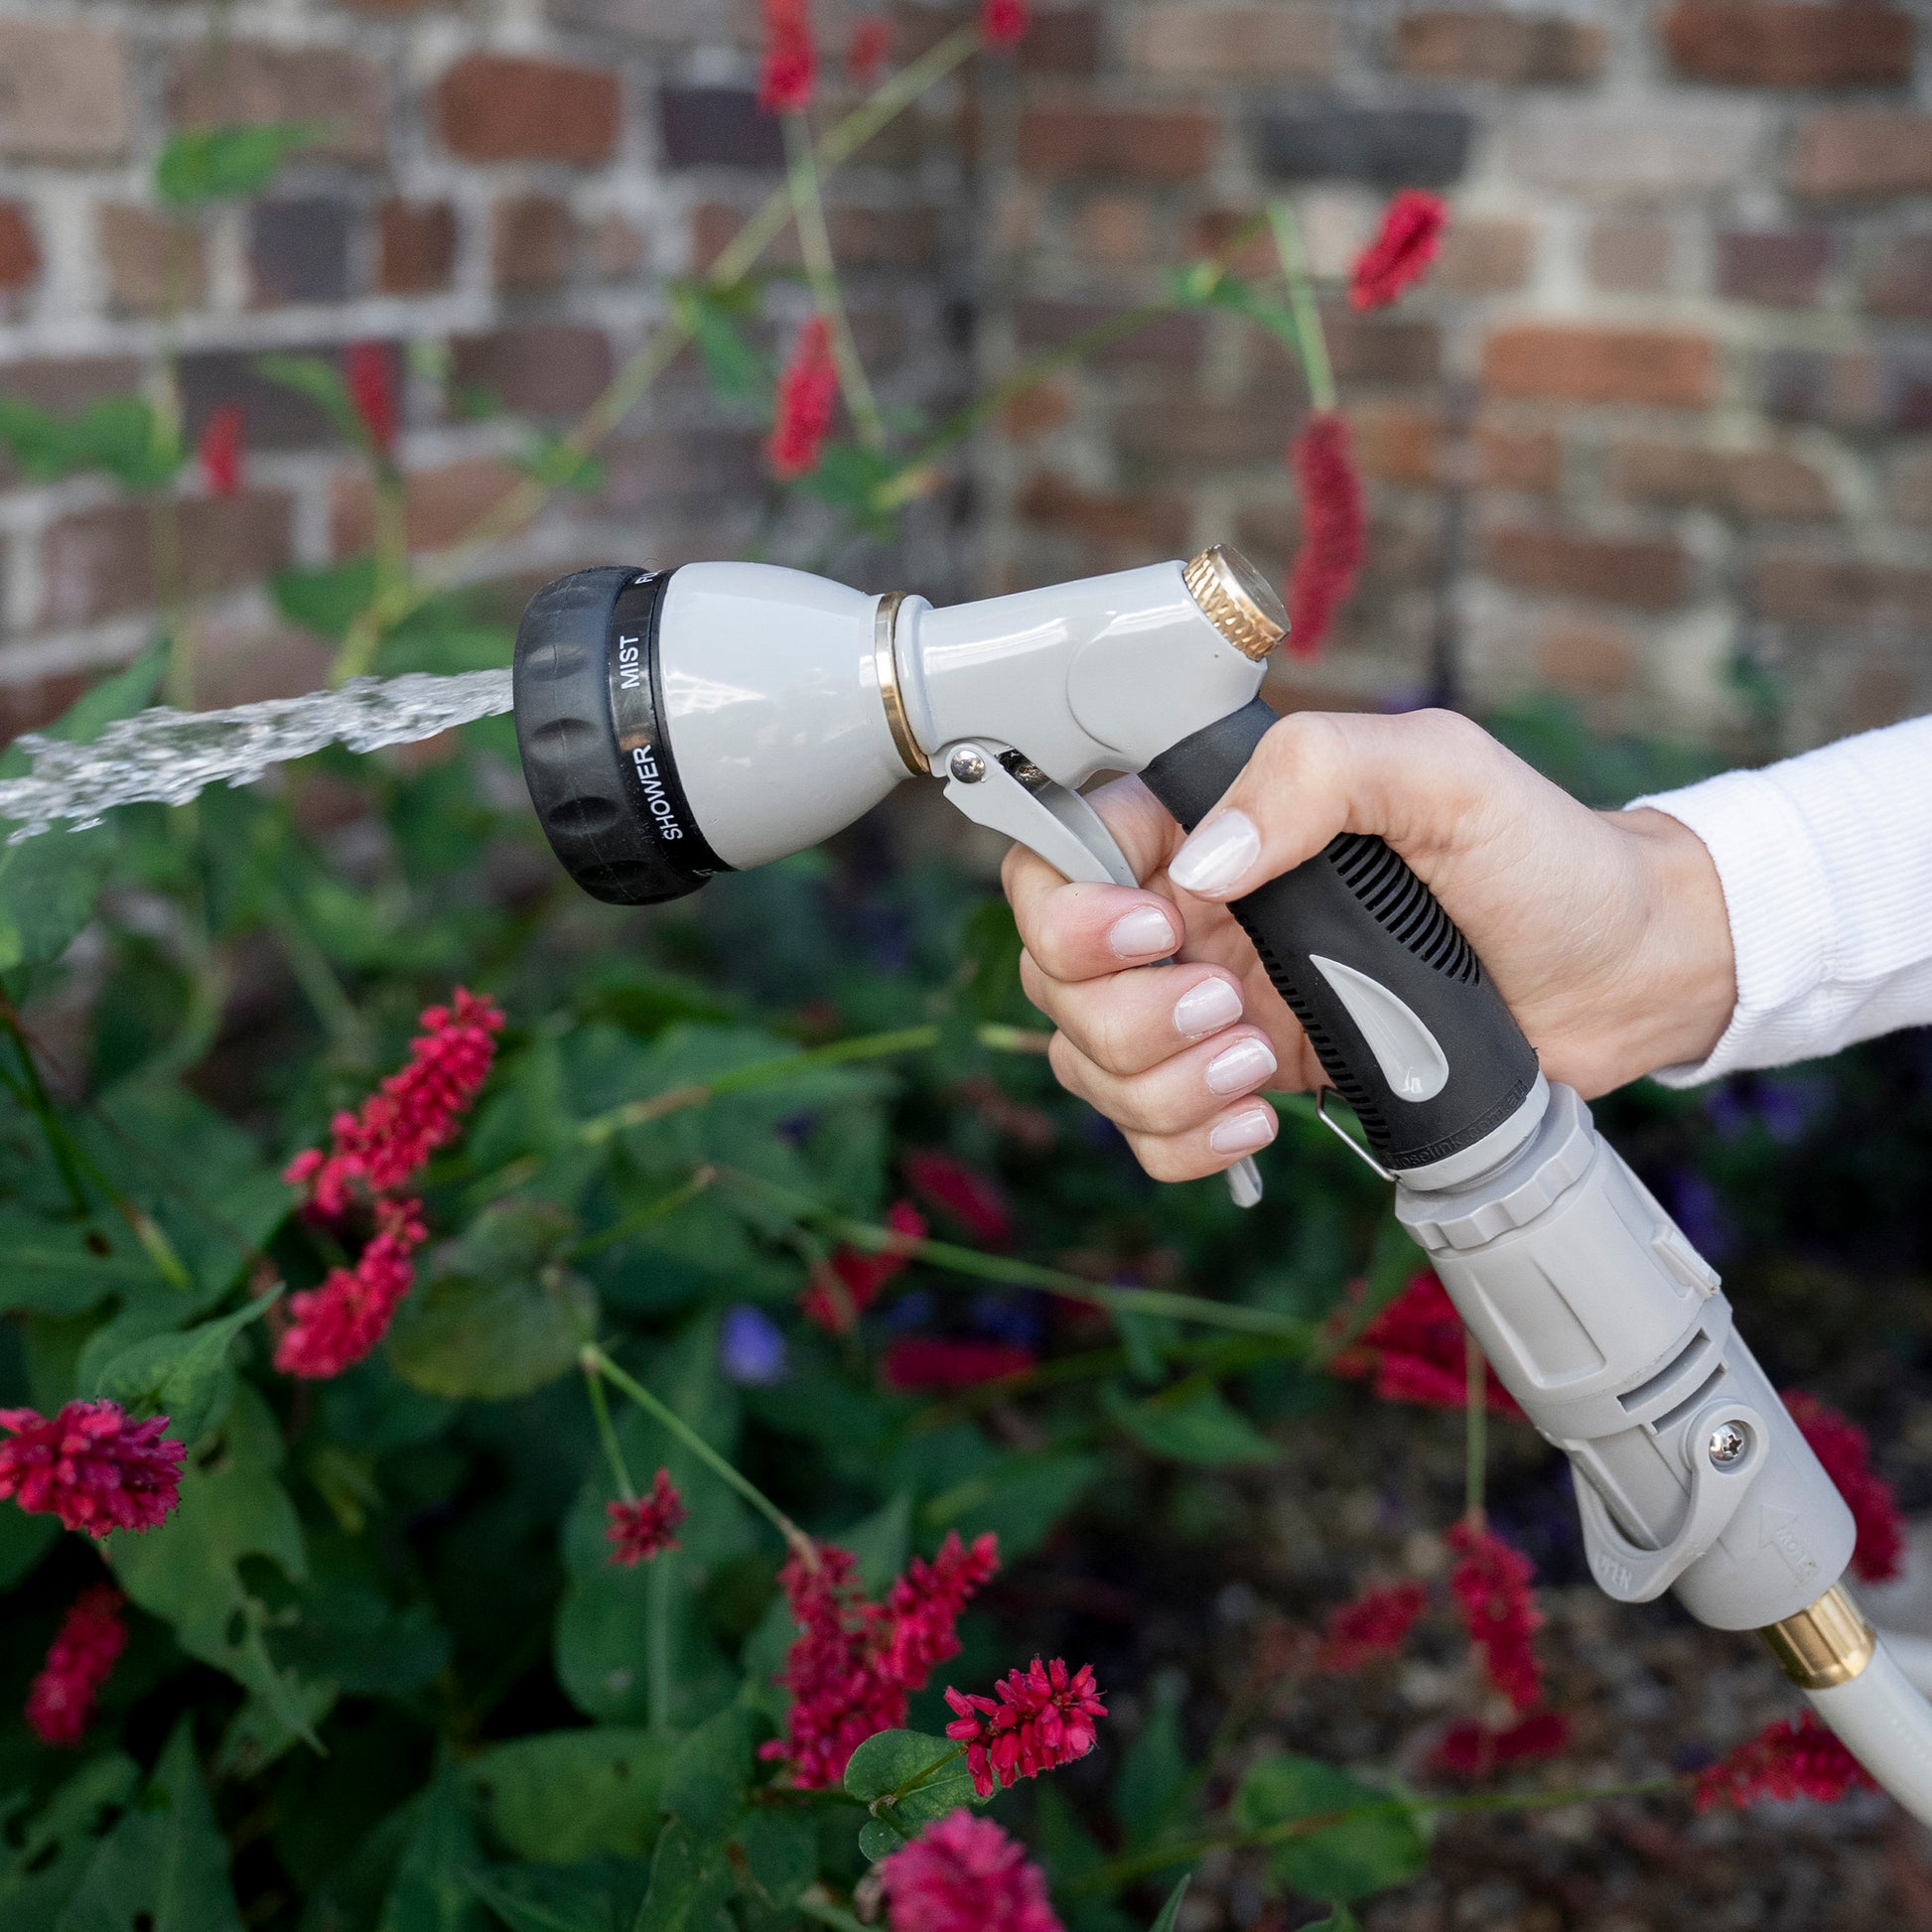 Female holding the 7-Function Spray Nozzle using the full setting to water plants